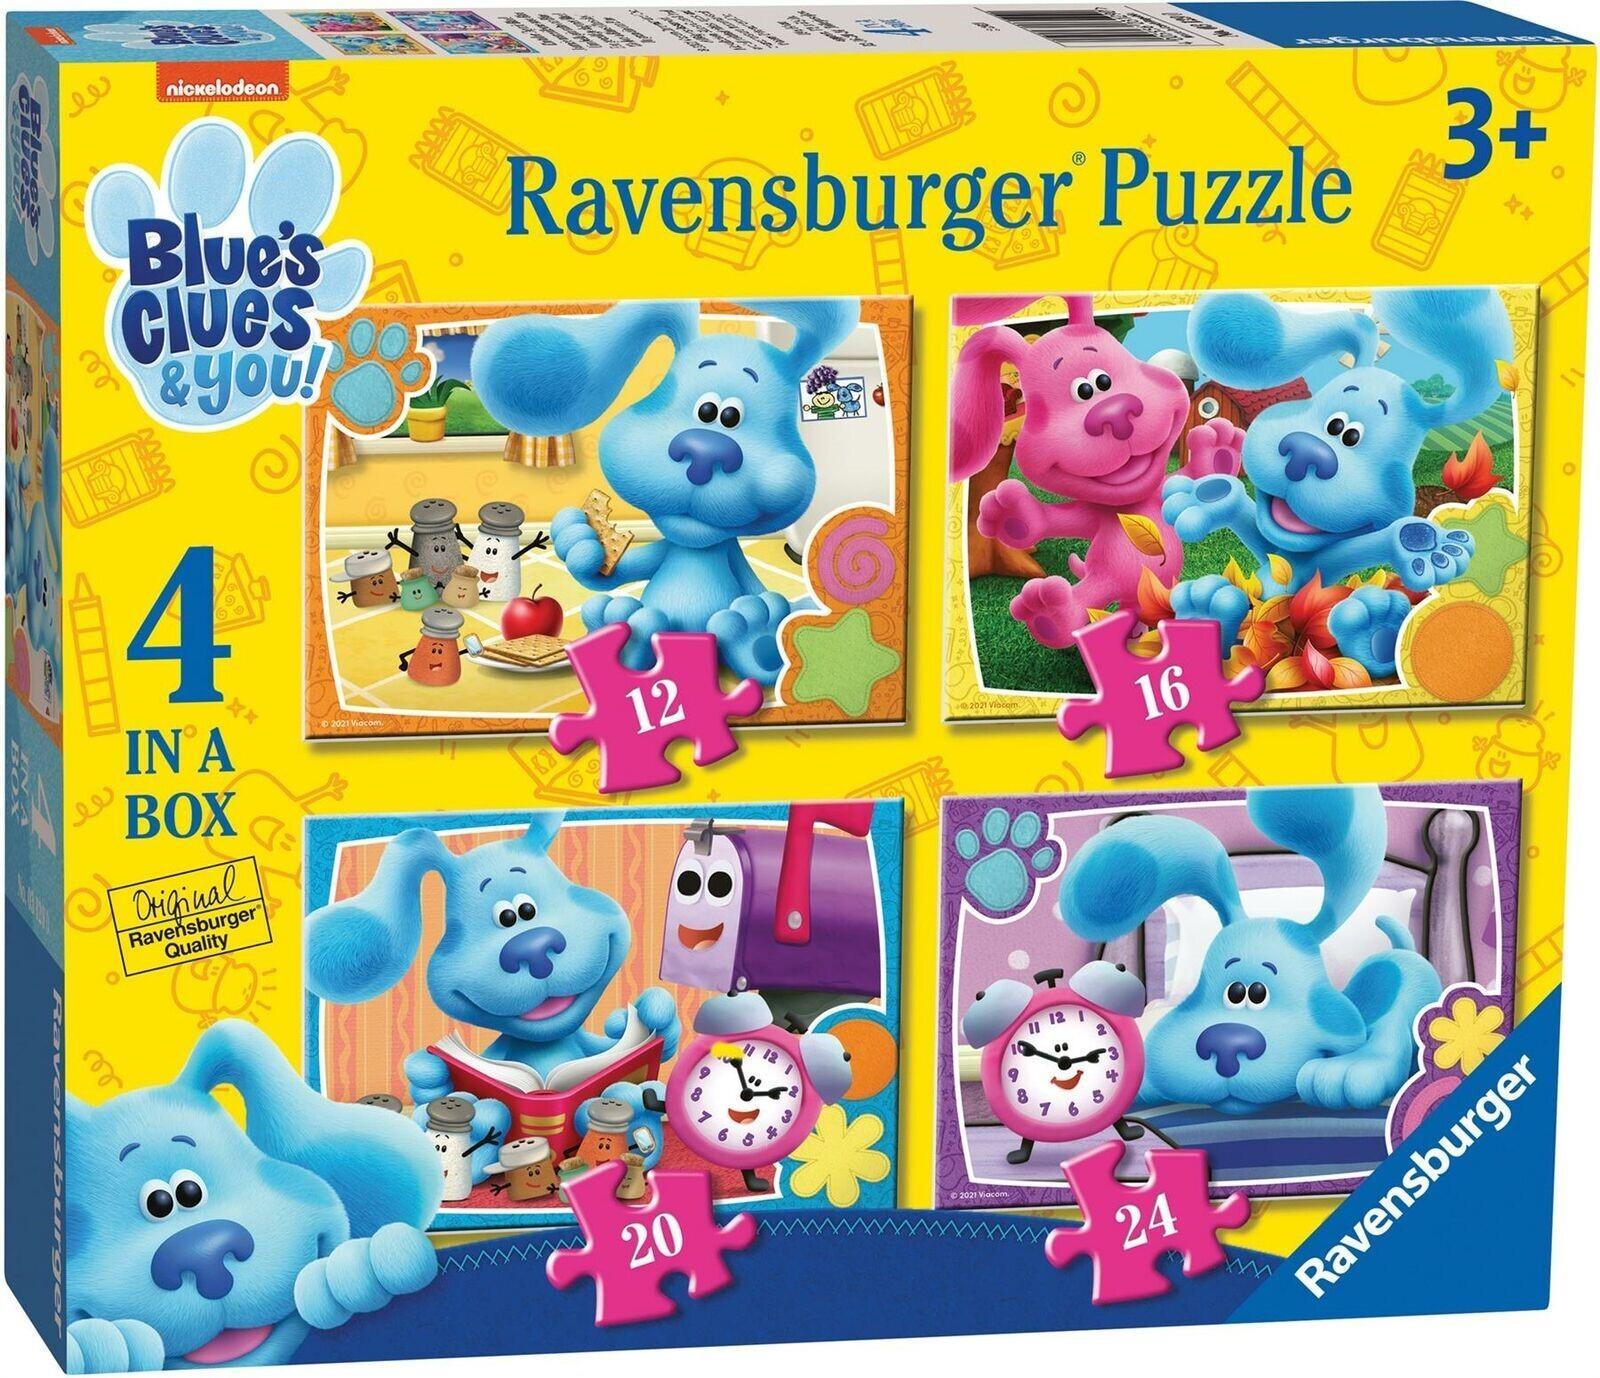 Ravensburger Blues Clues We Love a Blues Clues Day! 4 Jigsaw Puzzles in 1 Box